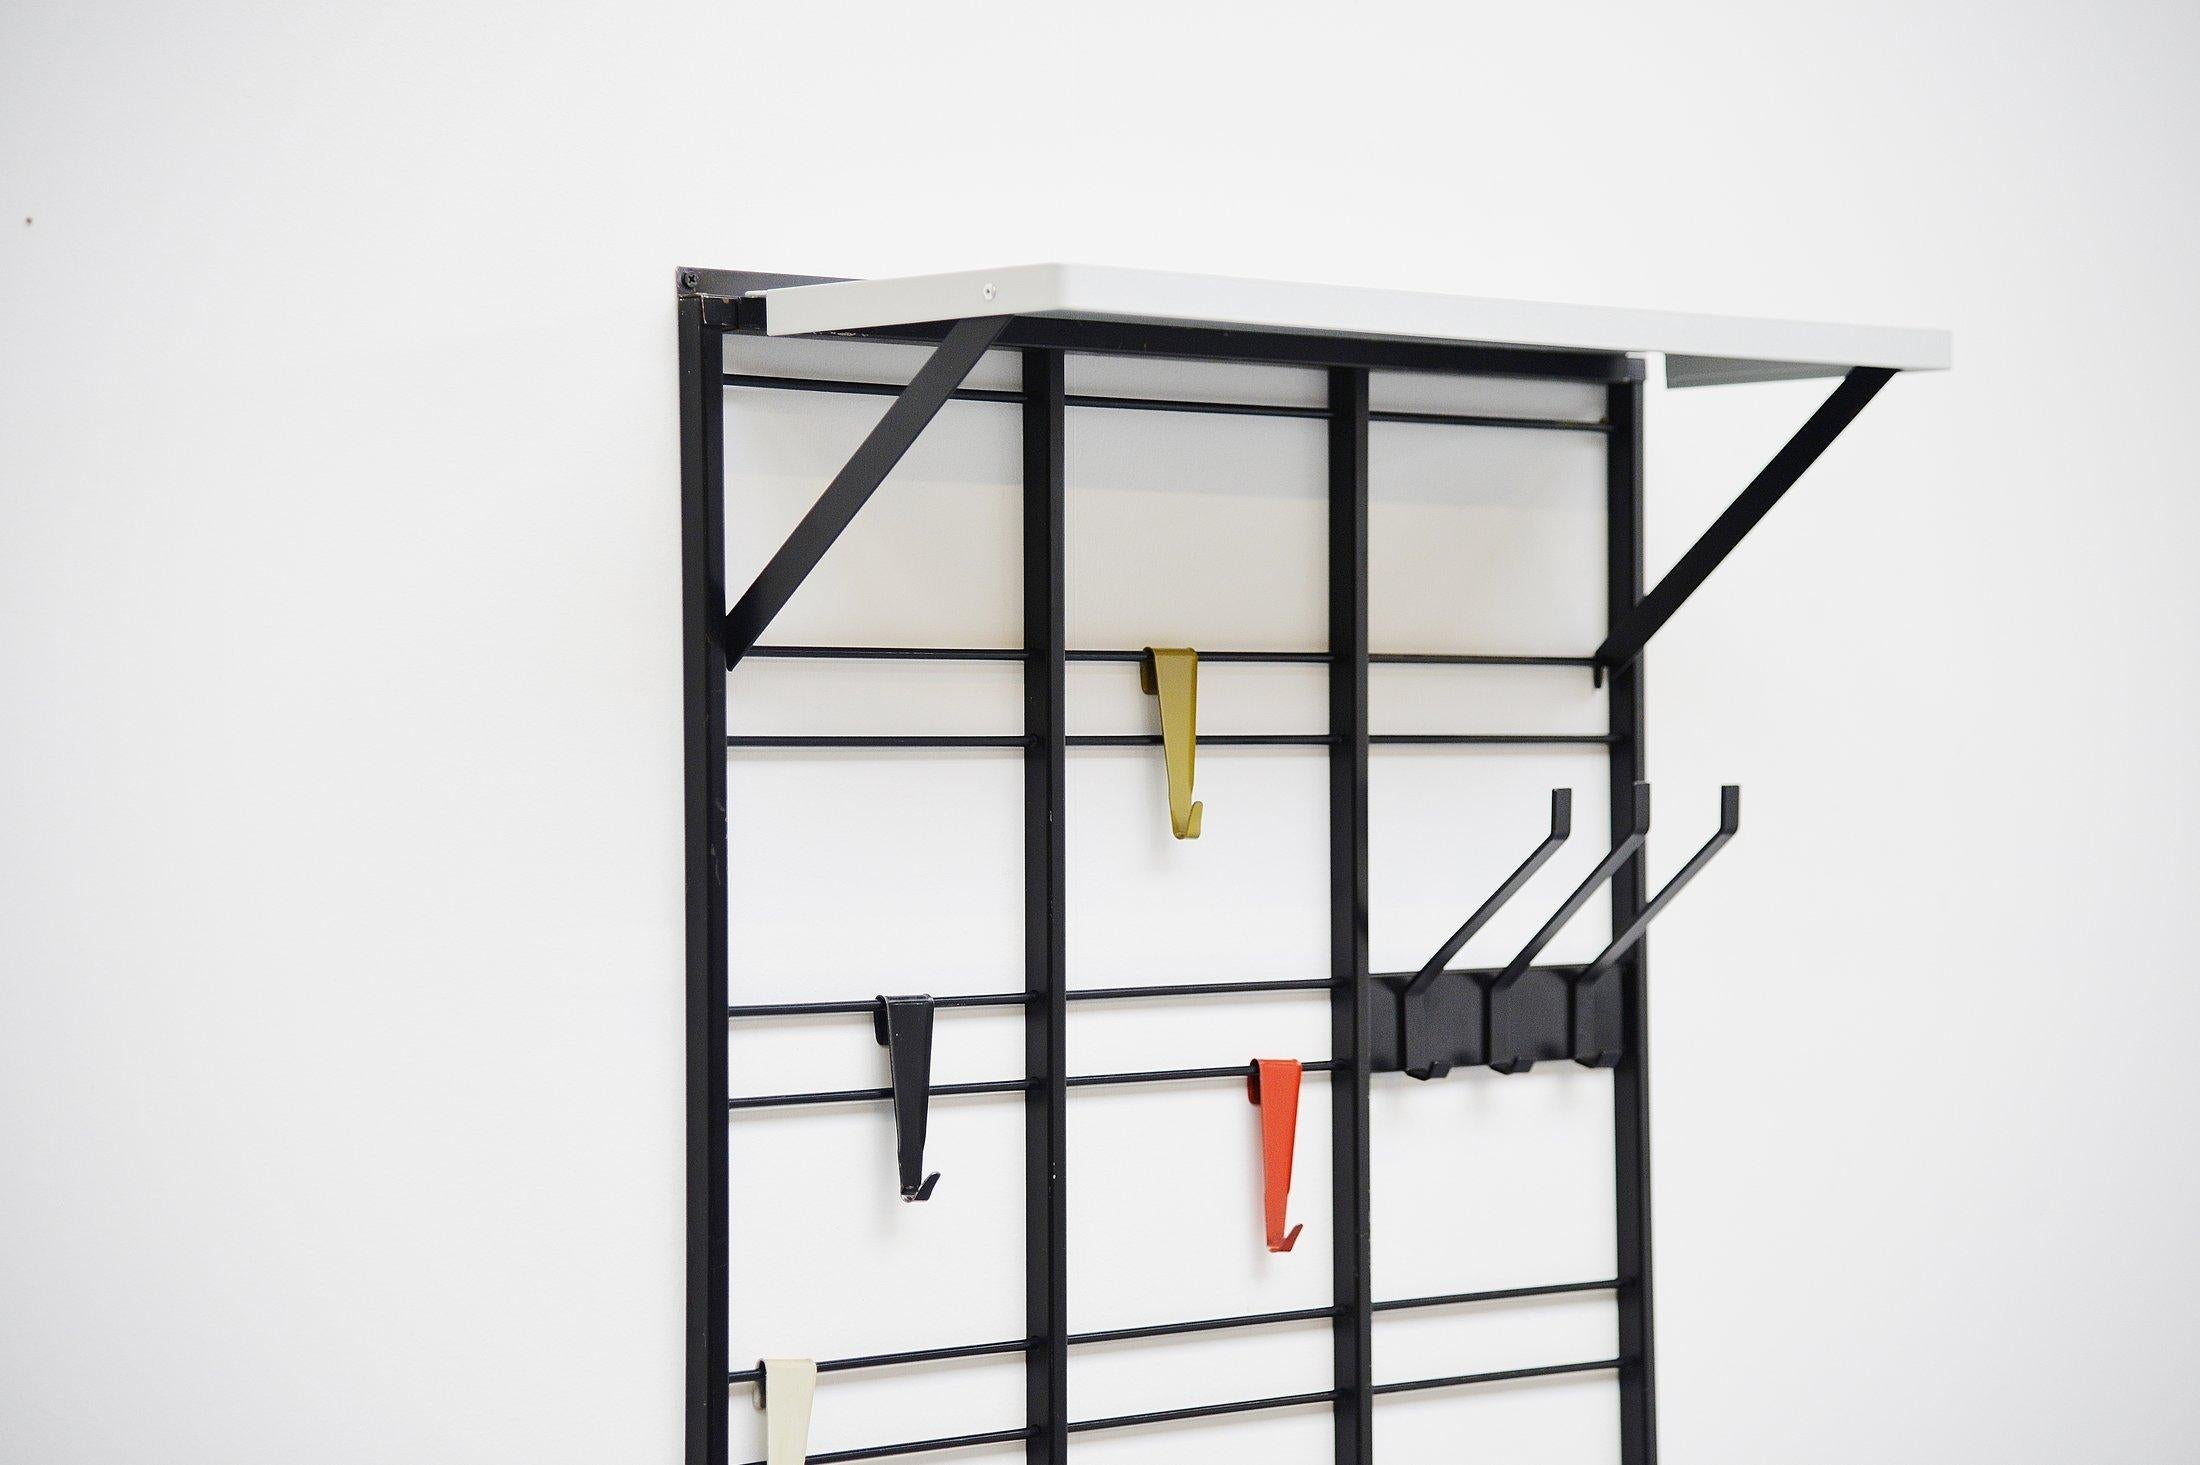 Fantastic shaped ‘Servo Muto’ wall mounted coat rack designed by Tjerk Reijenga and manufactured by Pilastro, Holland 1960. This coat rack is made of black painted metal and has 12 colored metal coat hooks in white, black, green and red. This is for